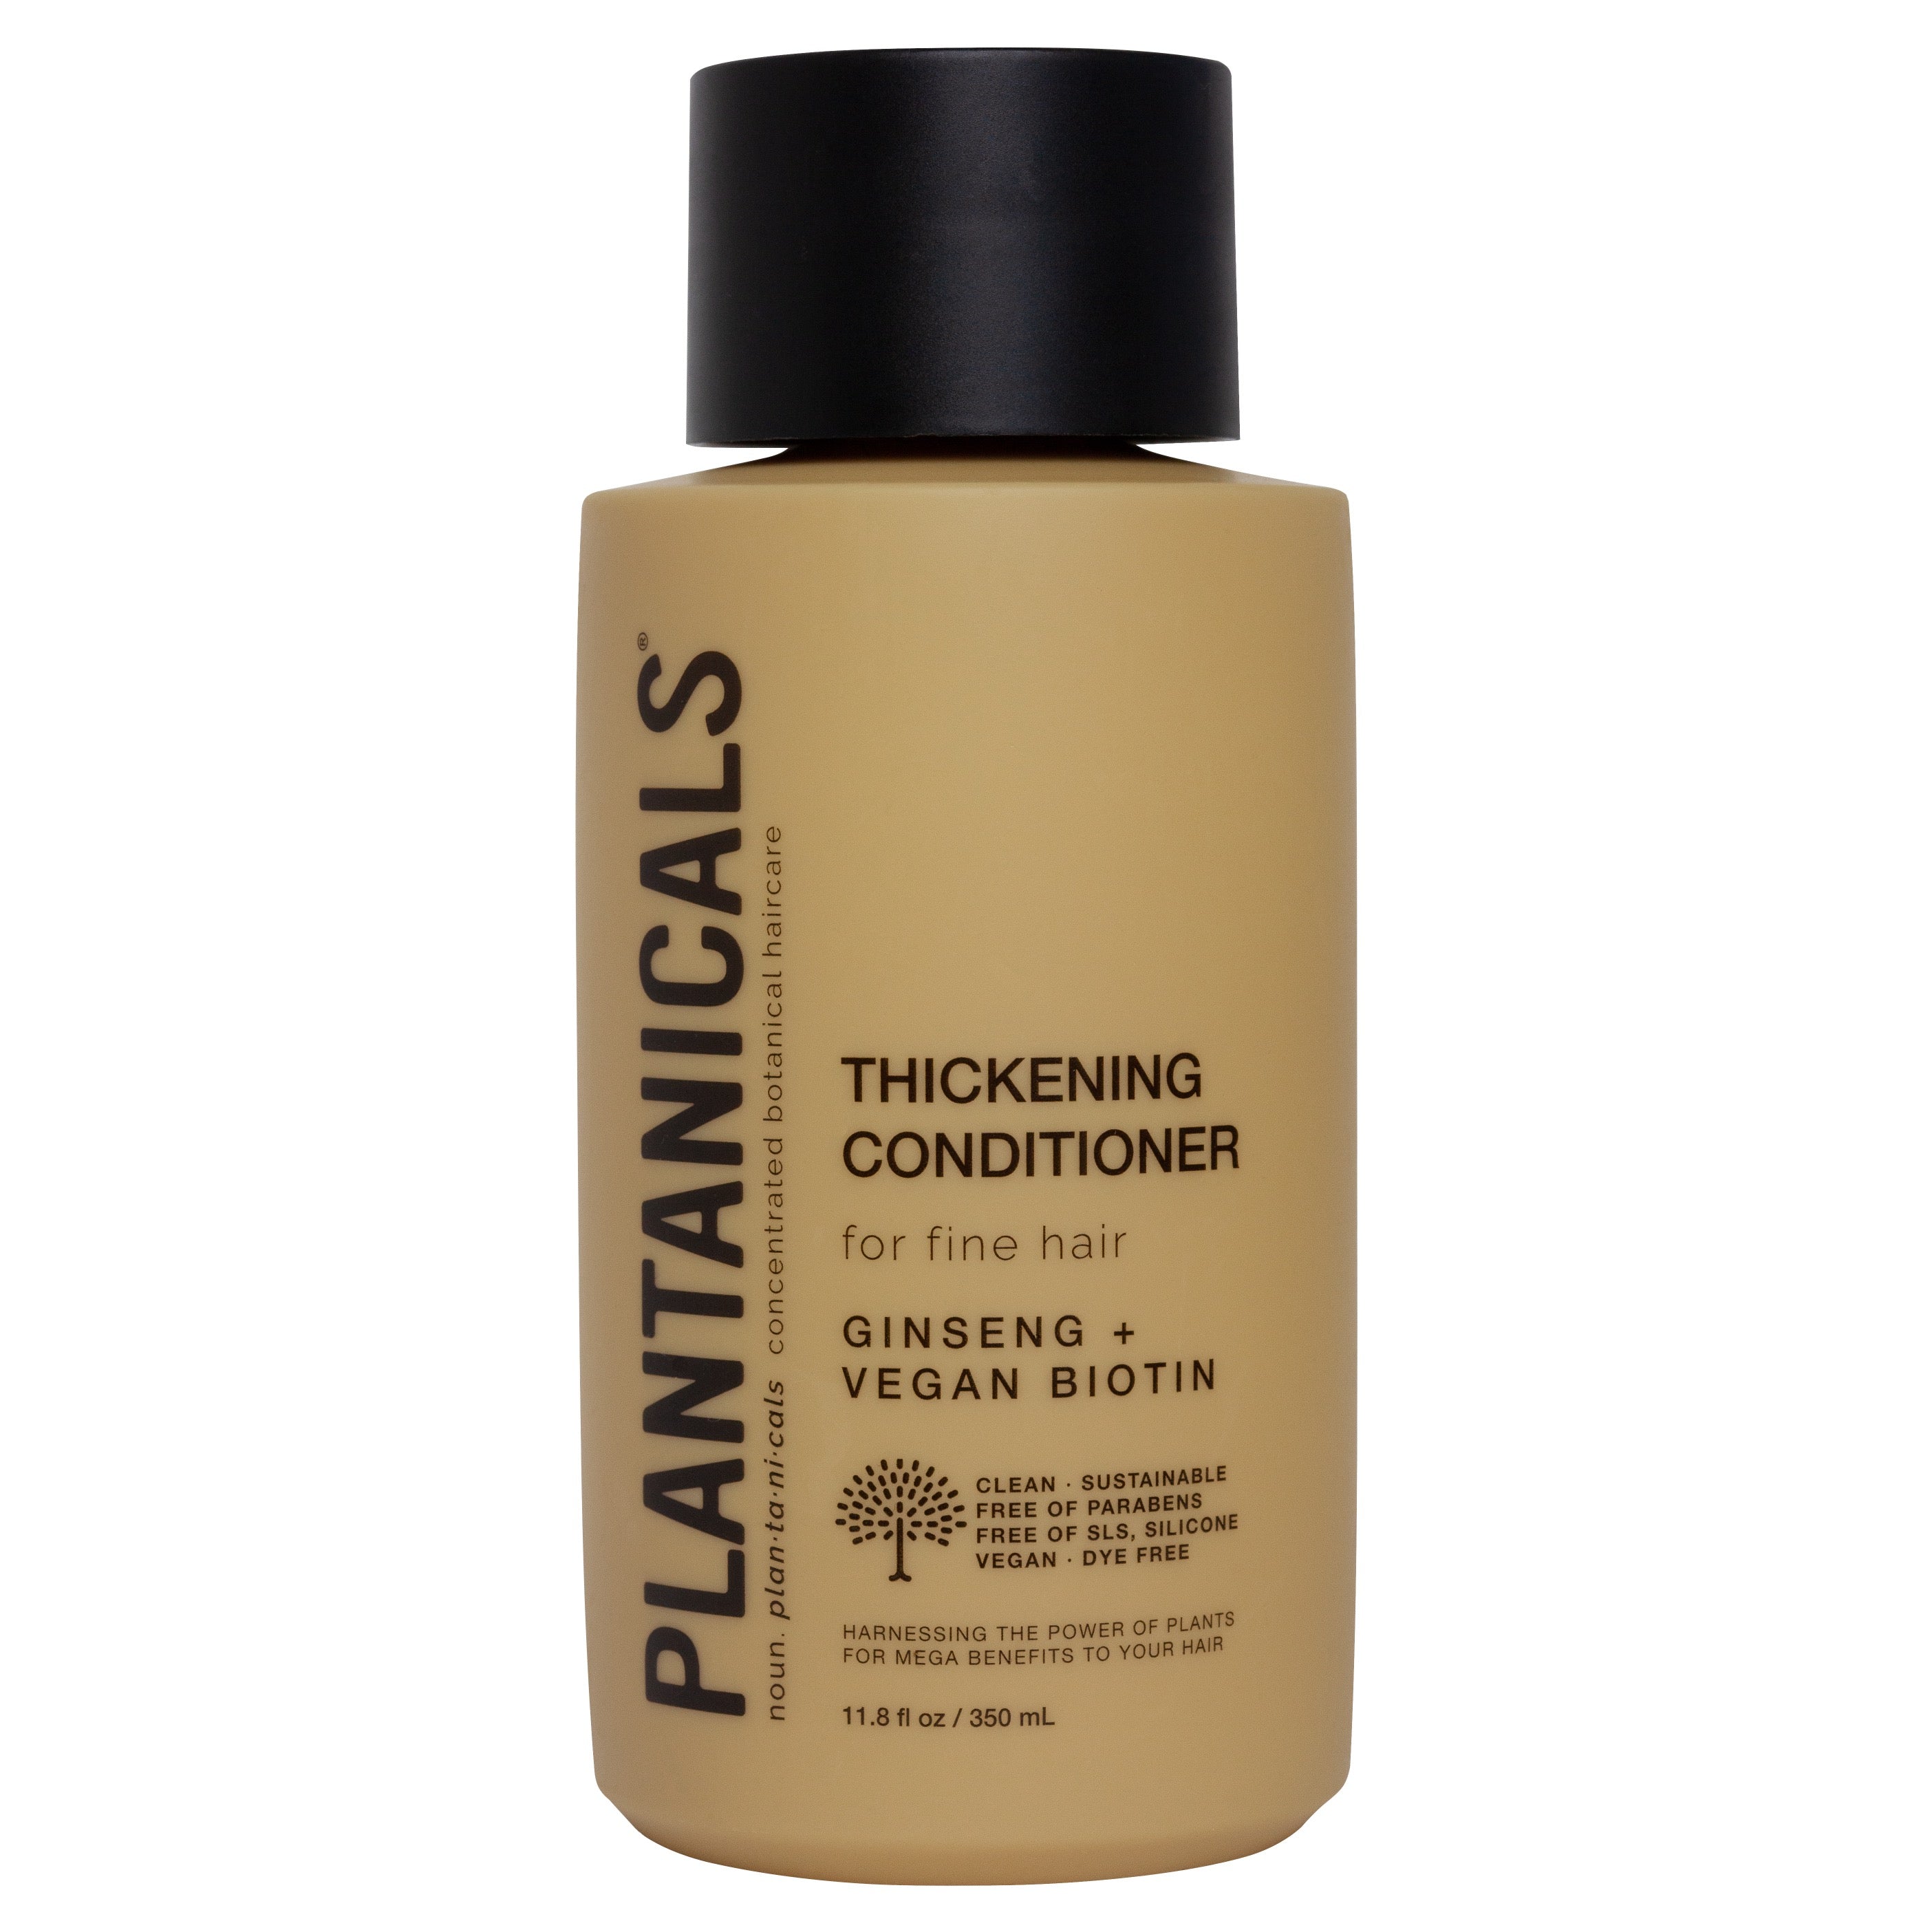 *New & Improved* Thickening Conditioner